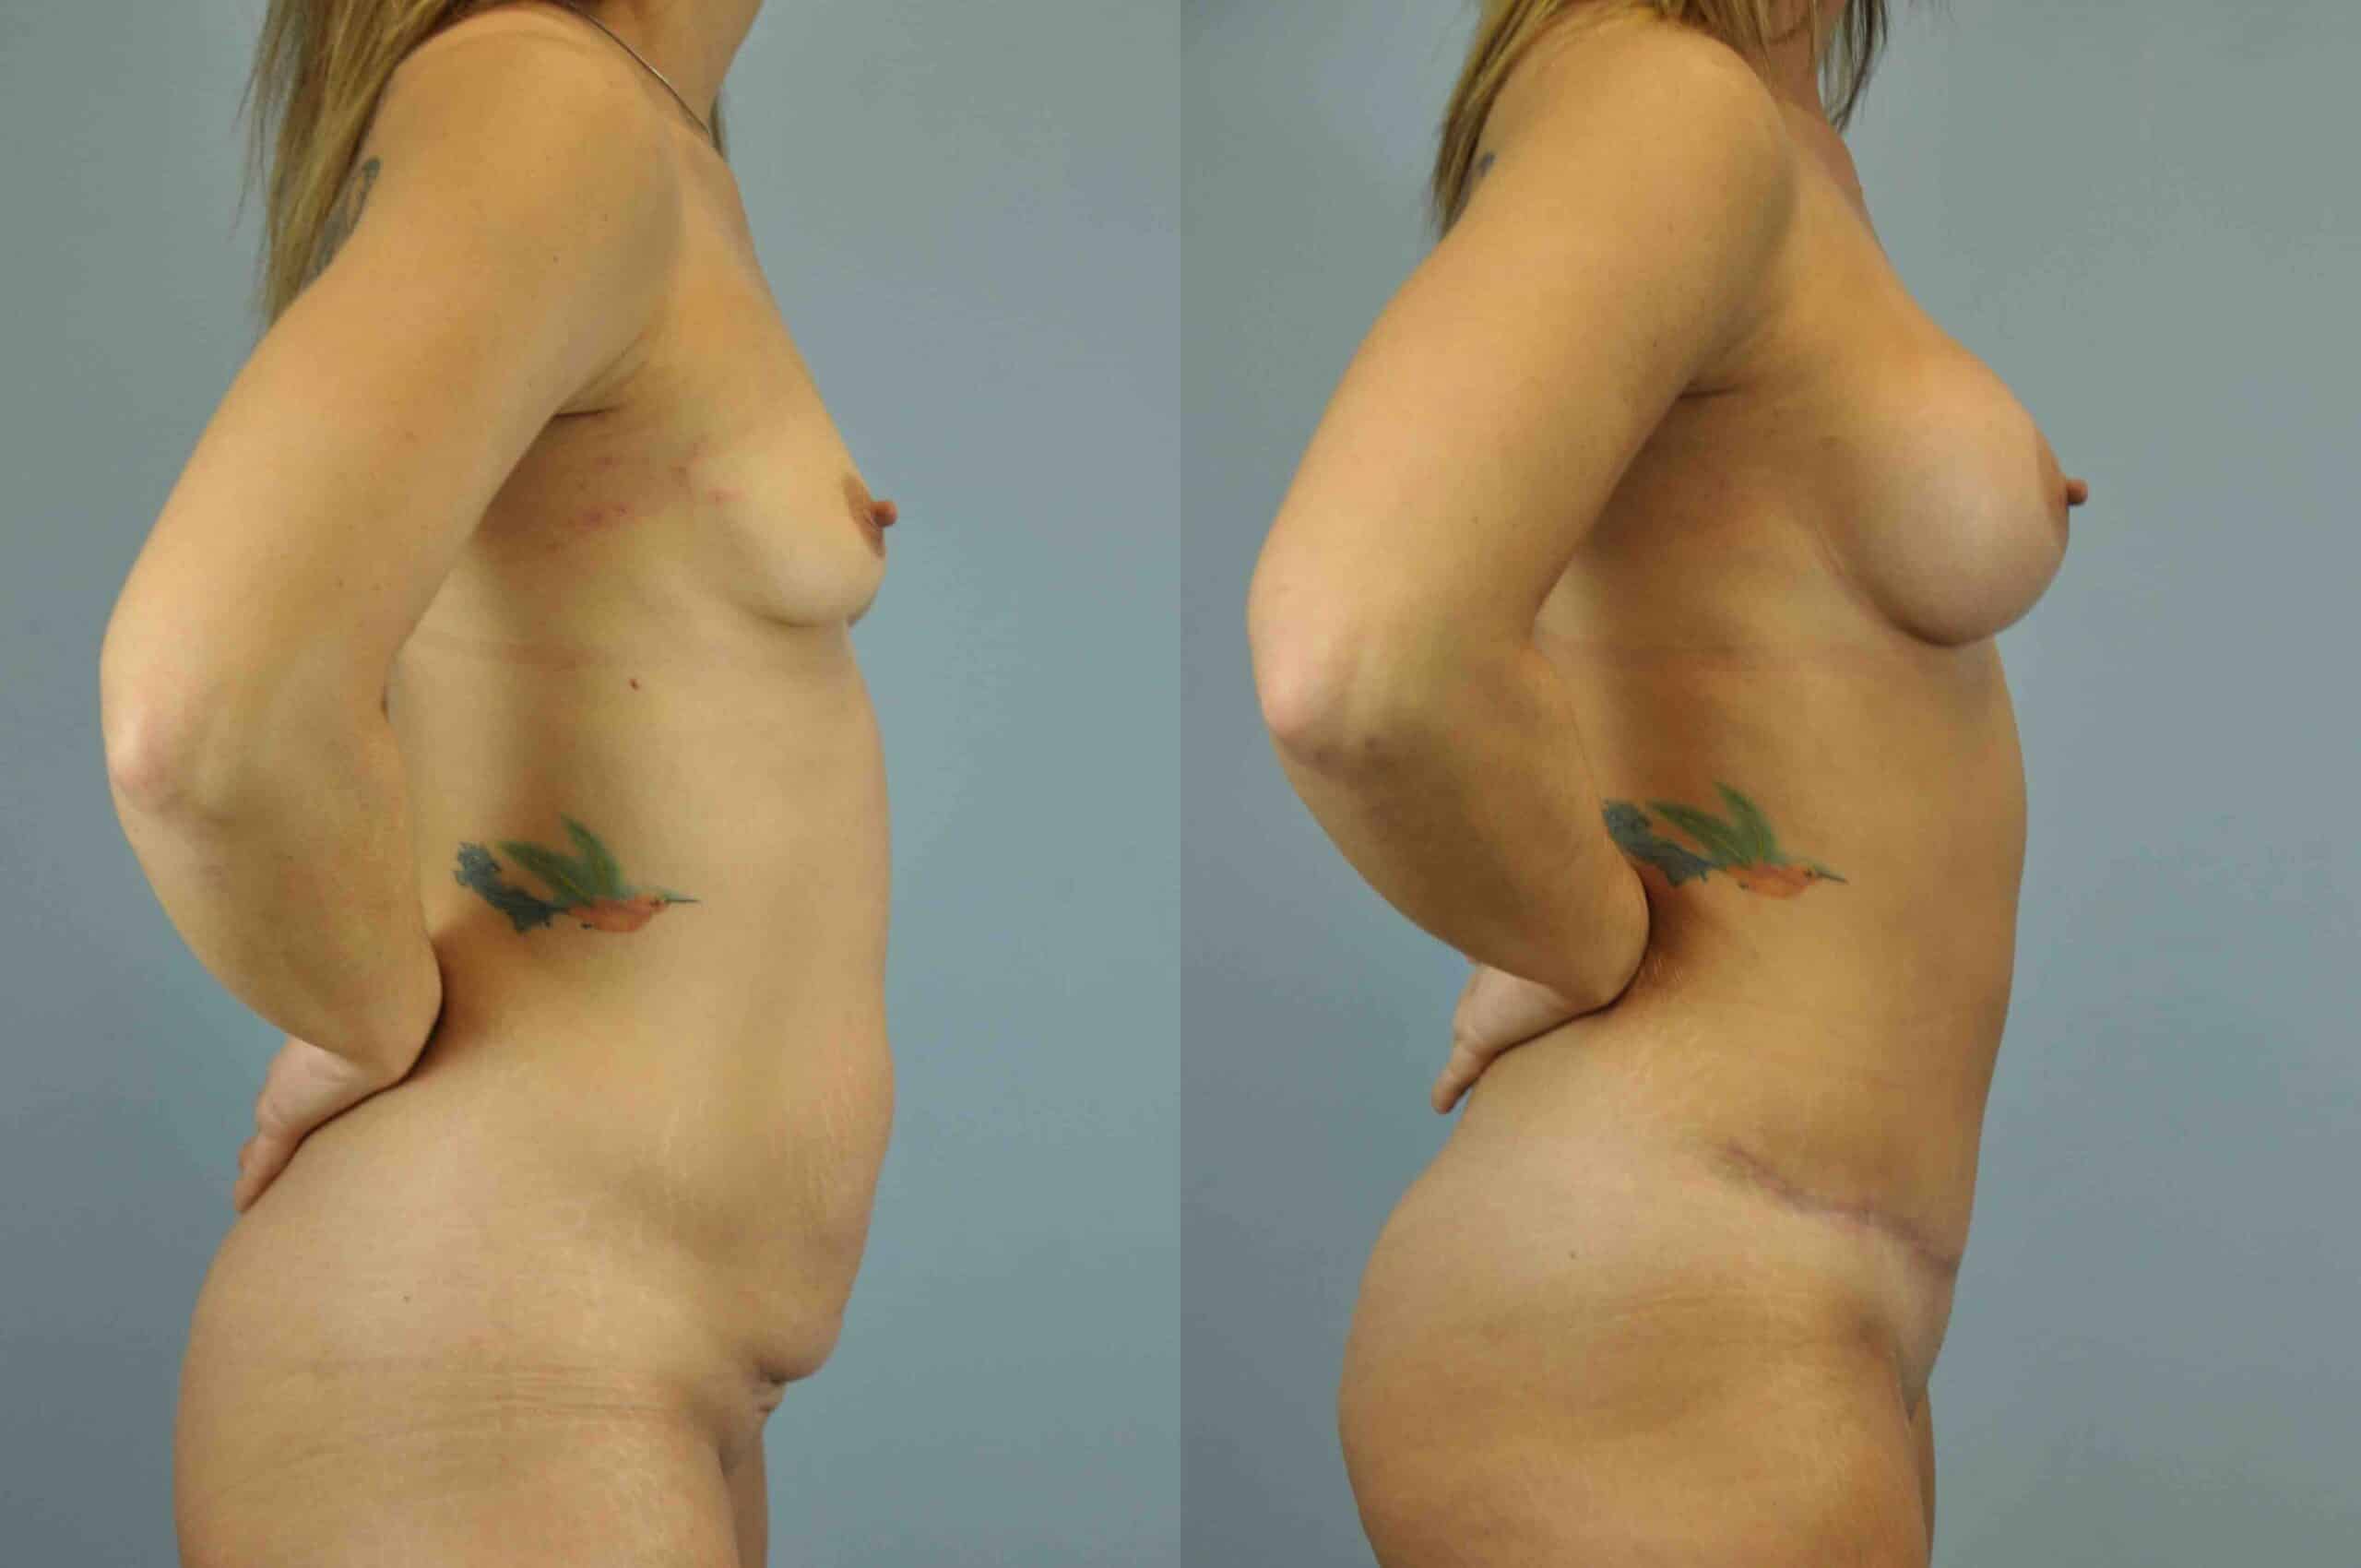 Before and after, 2 mo post op from Tummy Tuck, Breast Augmentation performed by Dr. Paul Vanek (side view)